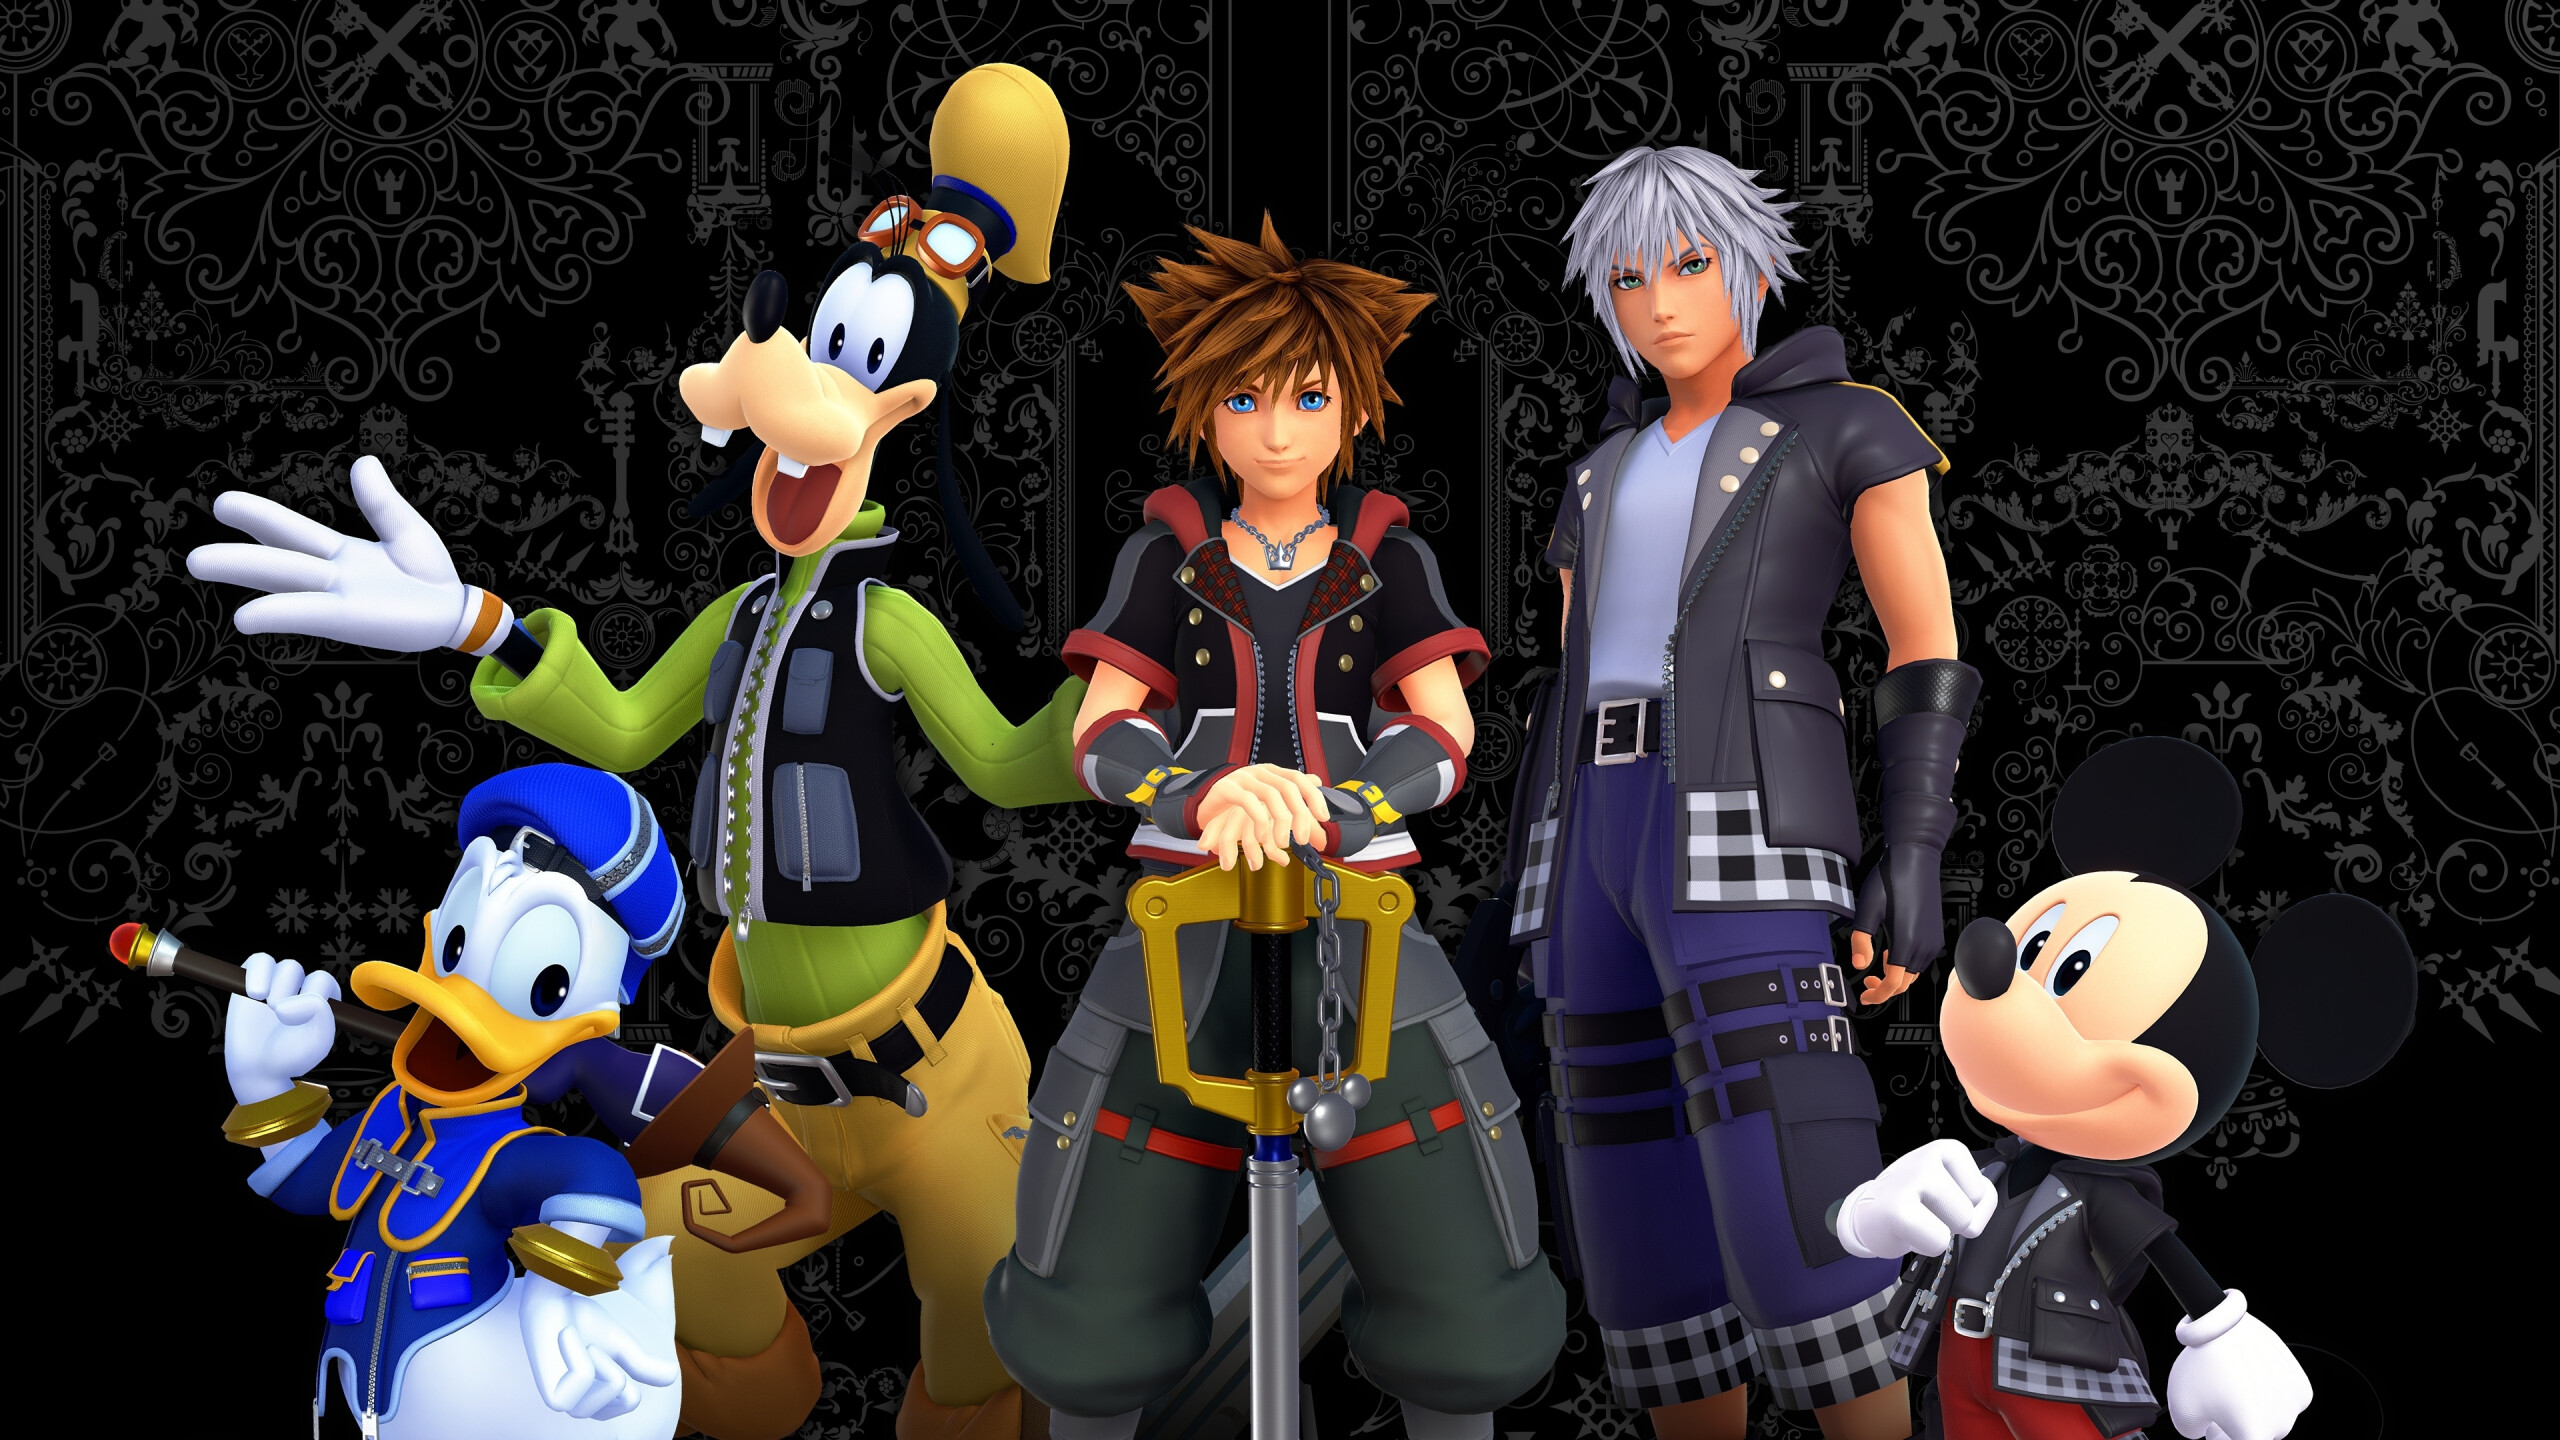 Kingdom Hearts III, E3 2018 reveal, Highly anticipated game, Unforgettable journey, 2560x1440 HD Desktop